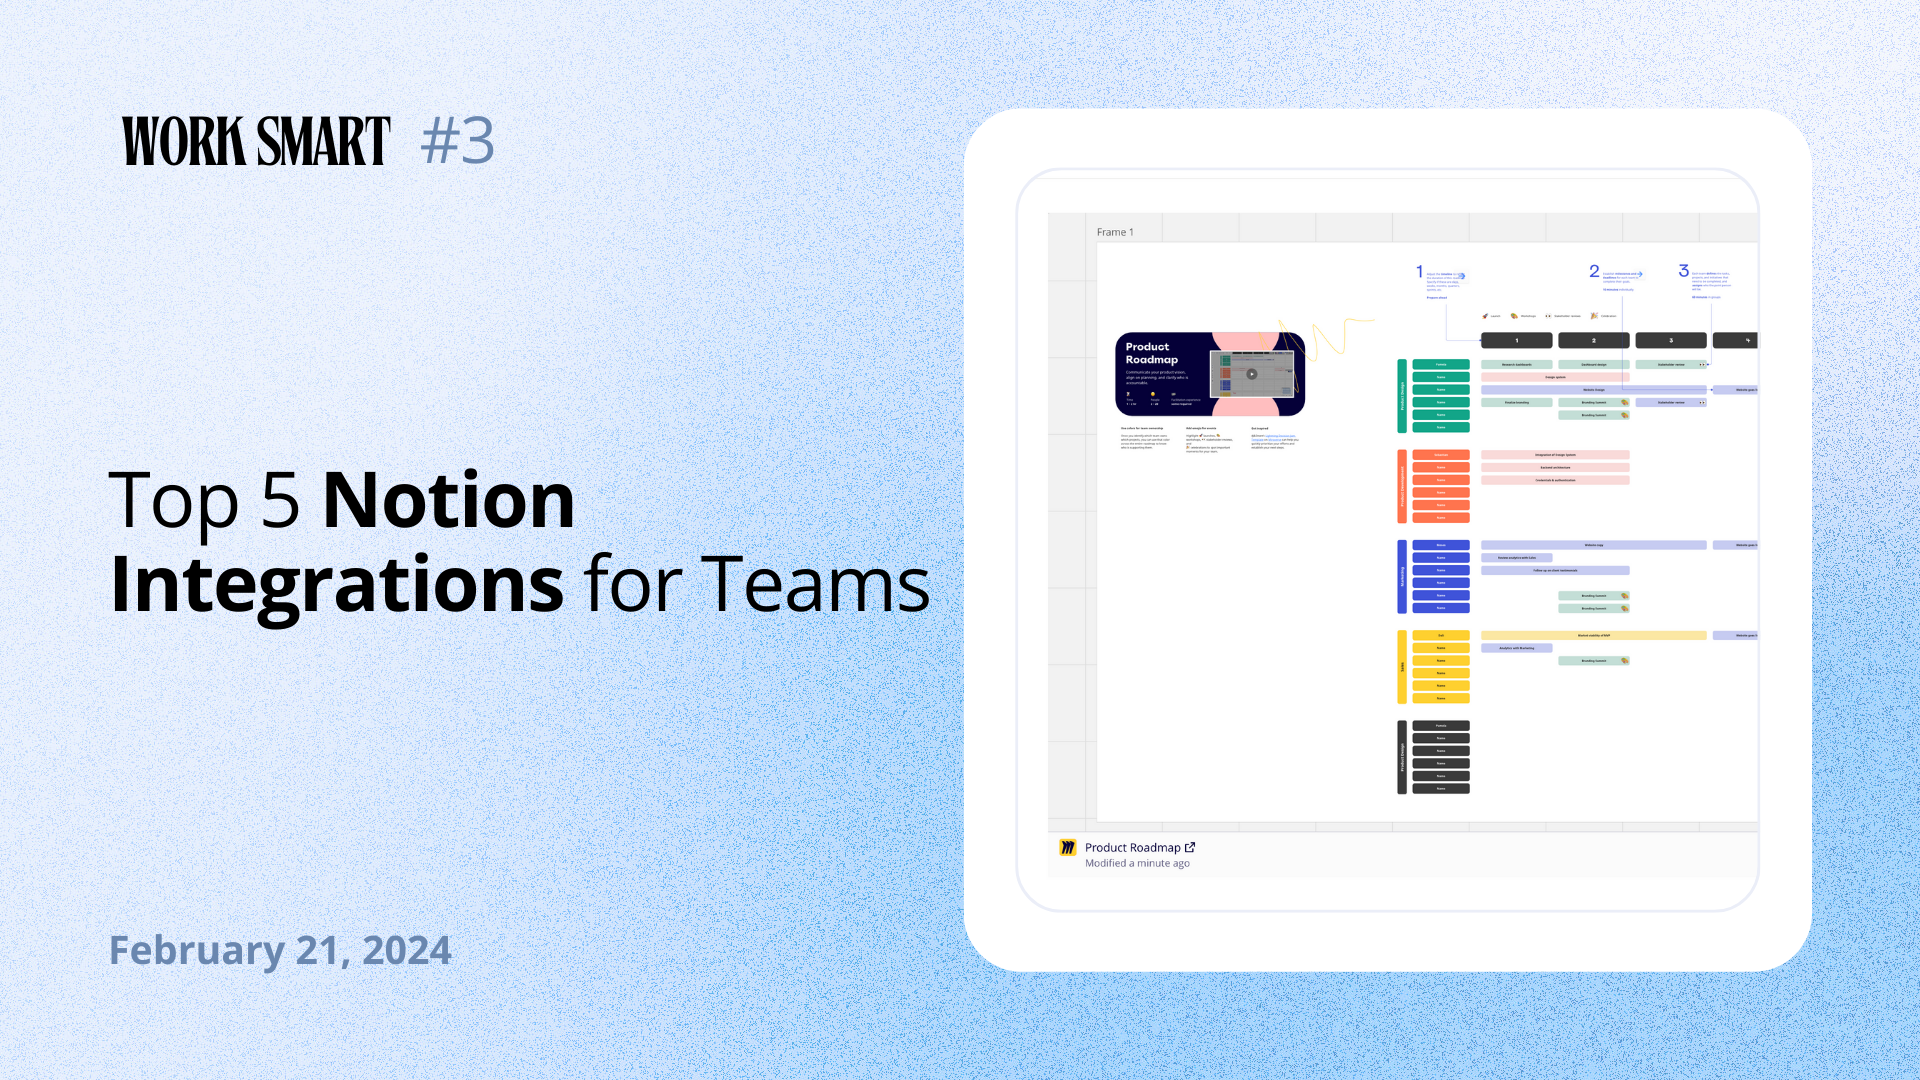 Top 5 Notion Integrations for Teams